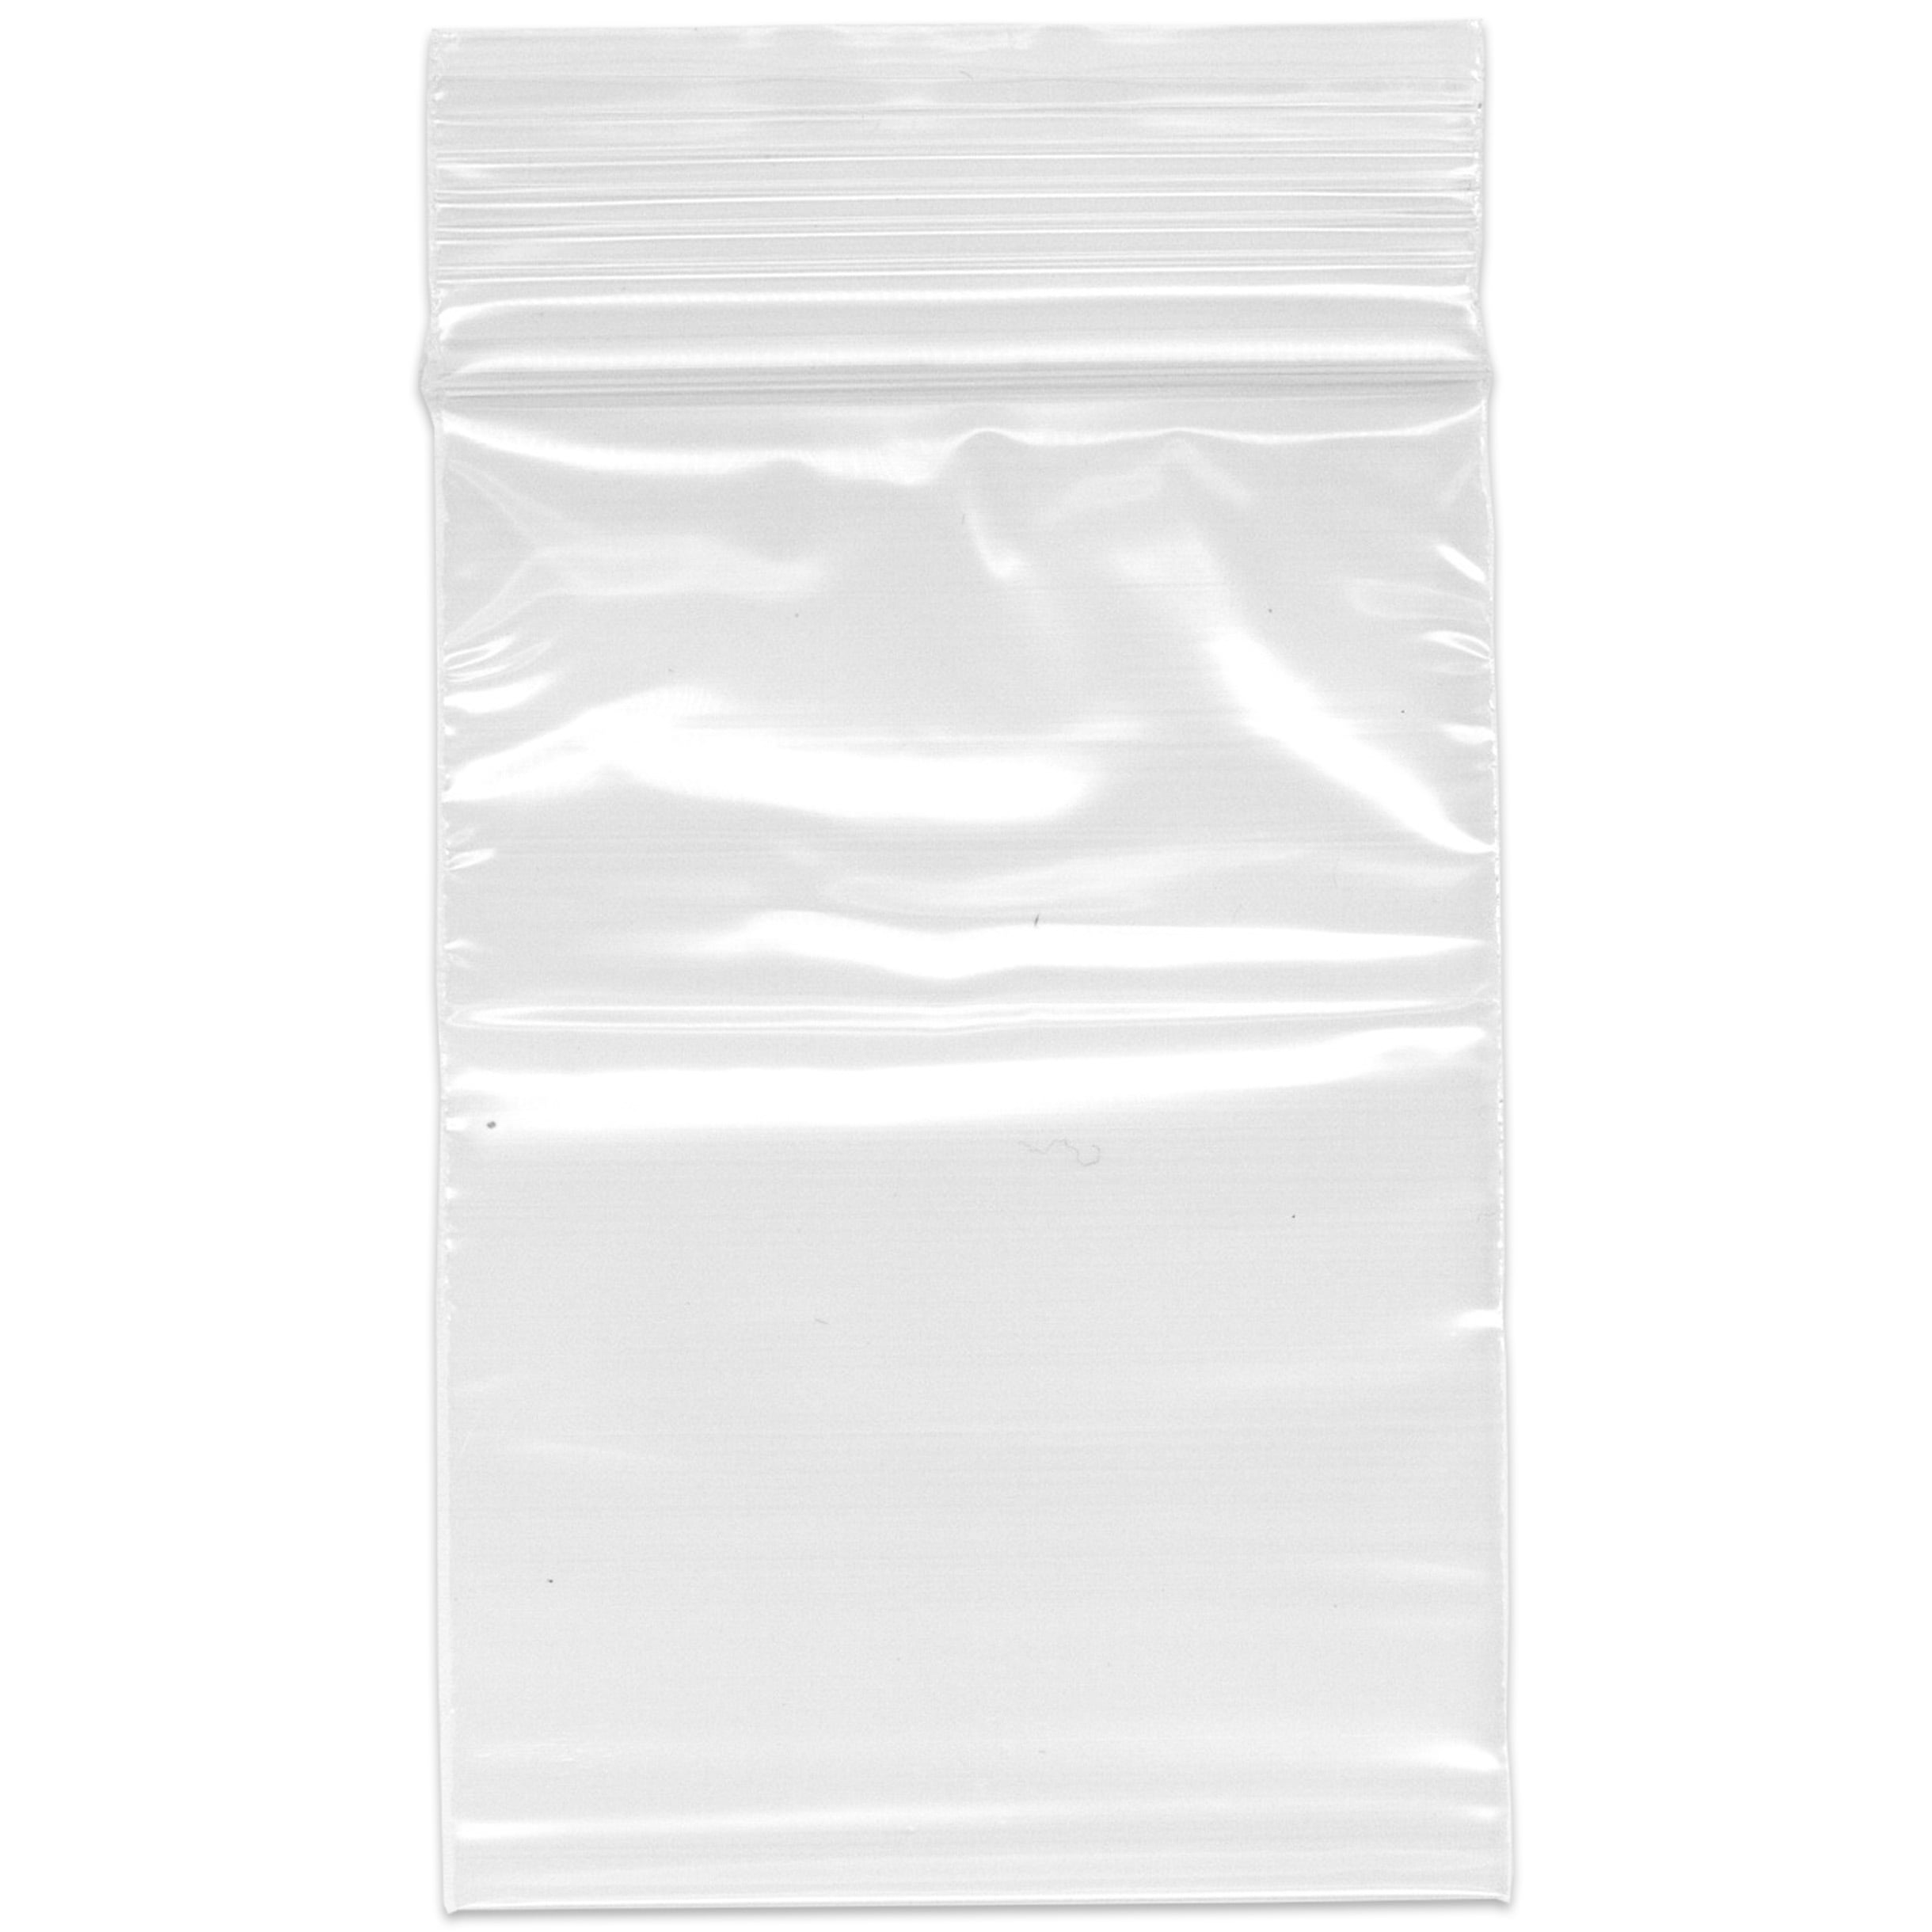 100 Set Reclosable Clear Plastic Poly Bags 3 x 3 Zip Seal 2mil